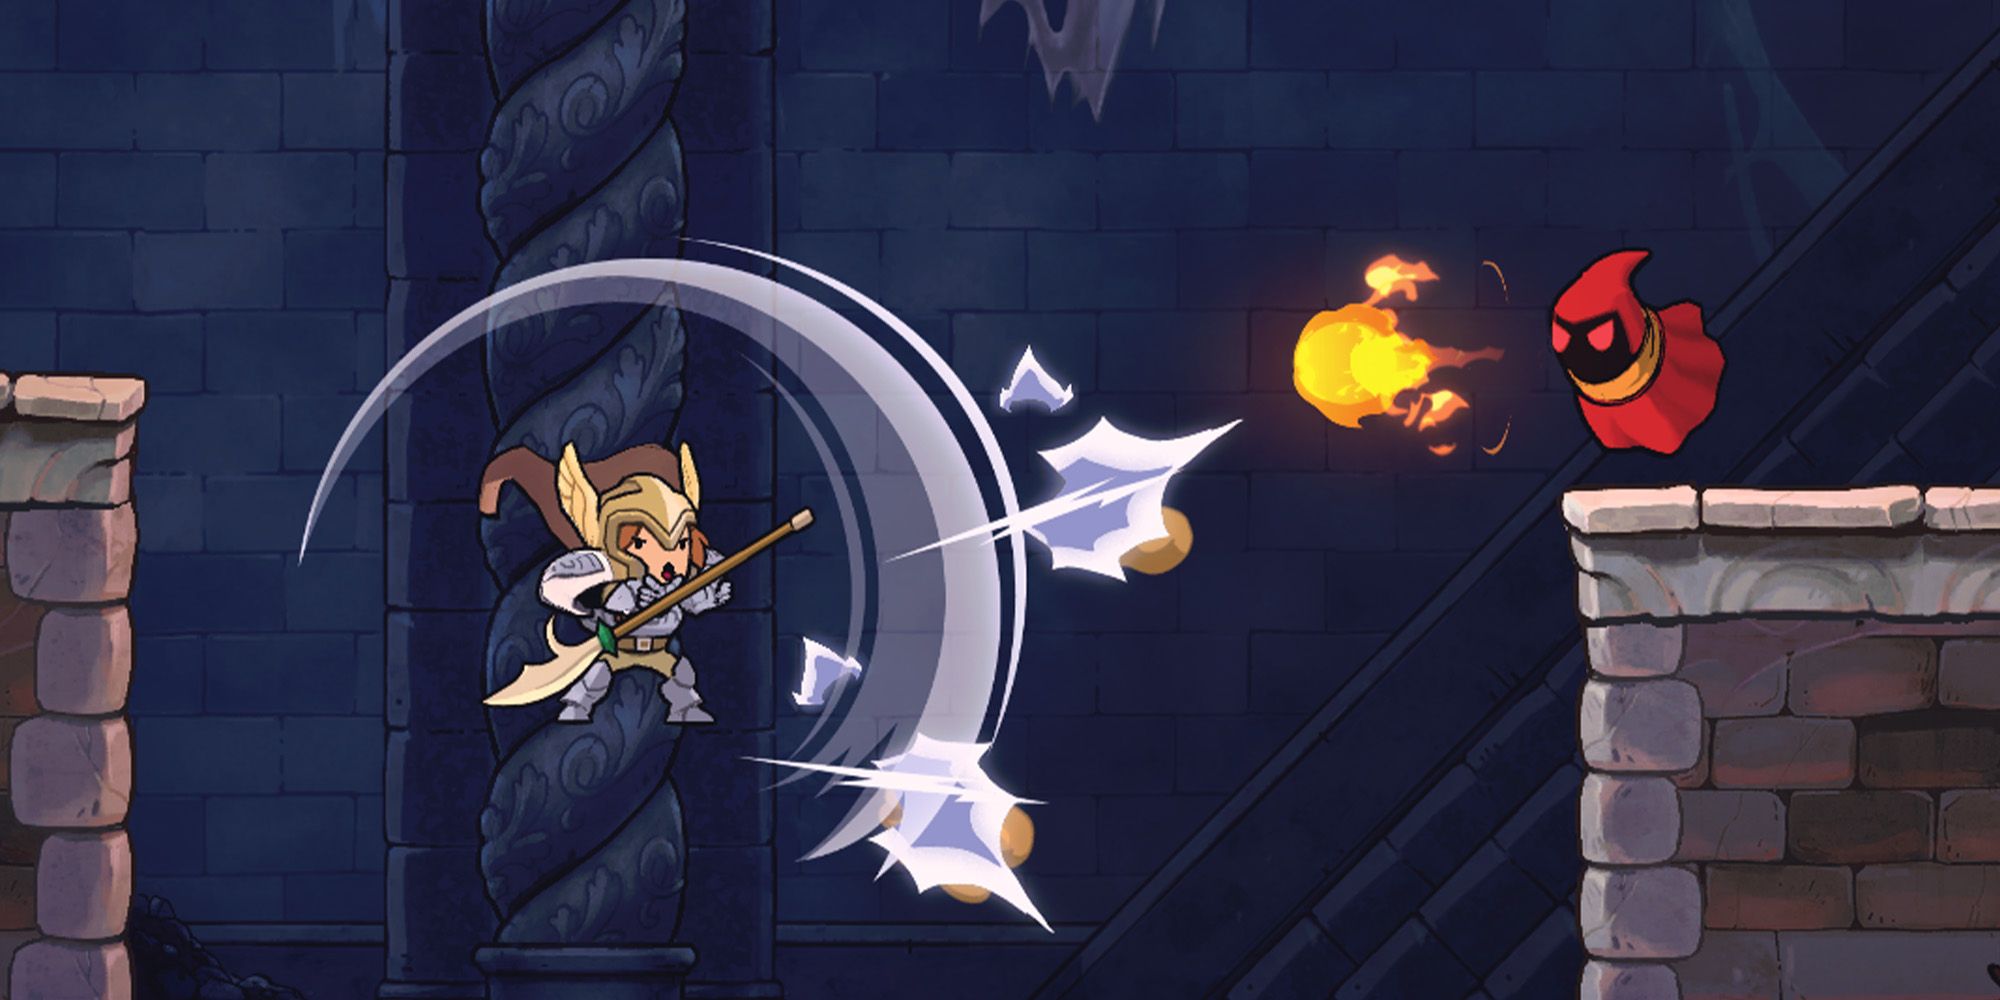 Rogue Legacy 2 screenshot of Valkyrie spinning their spear to block fireball projectiles